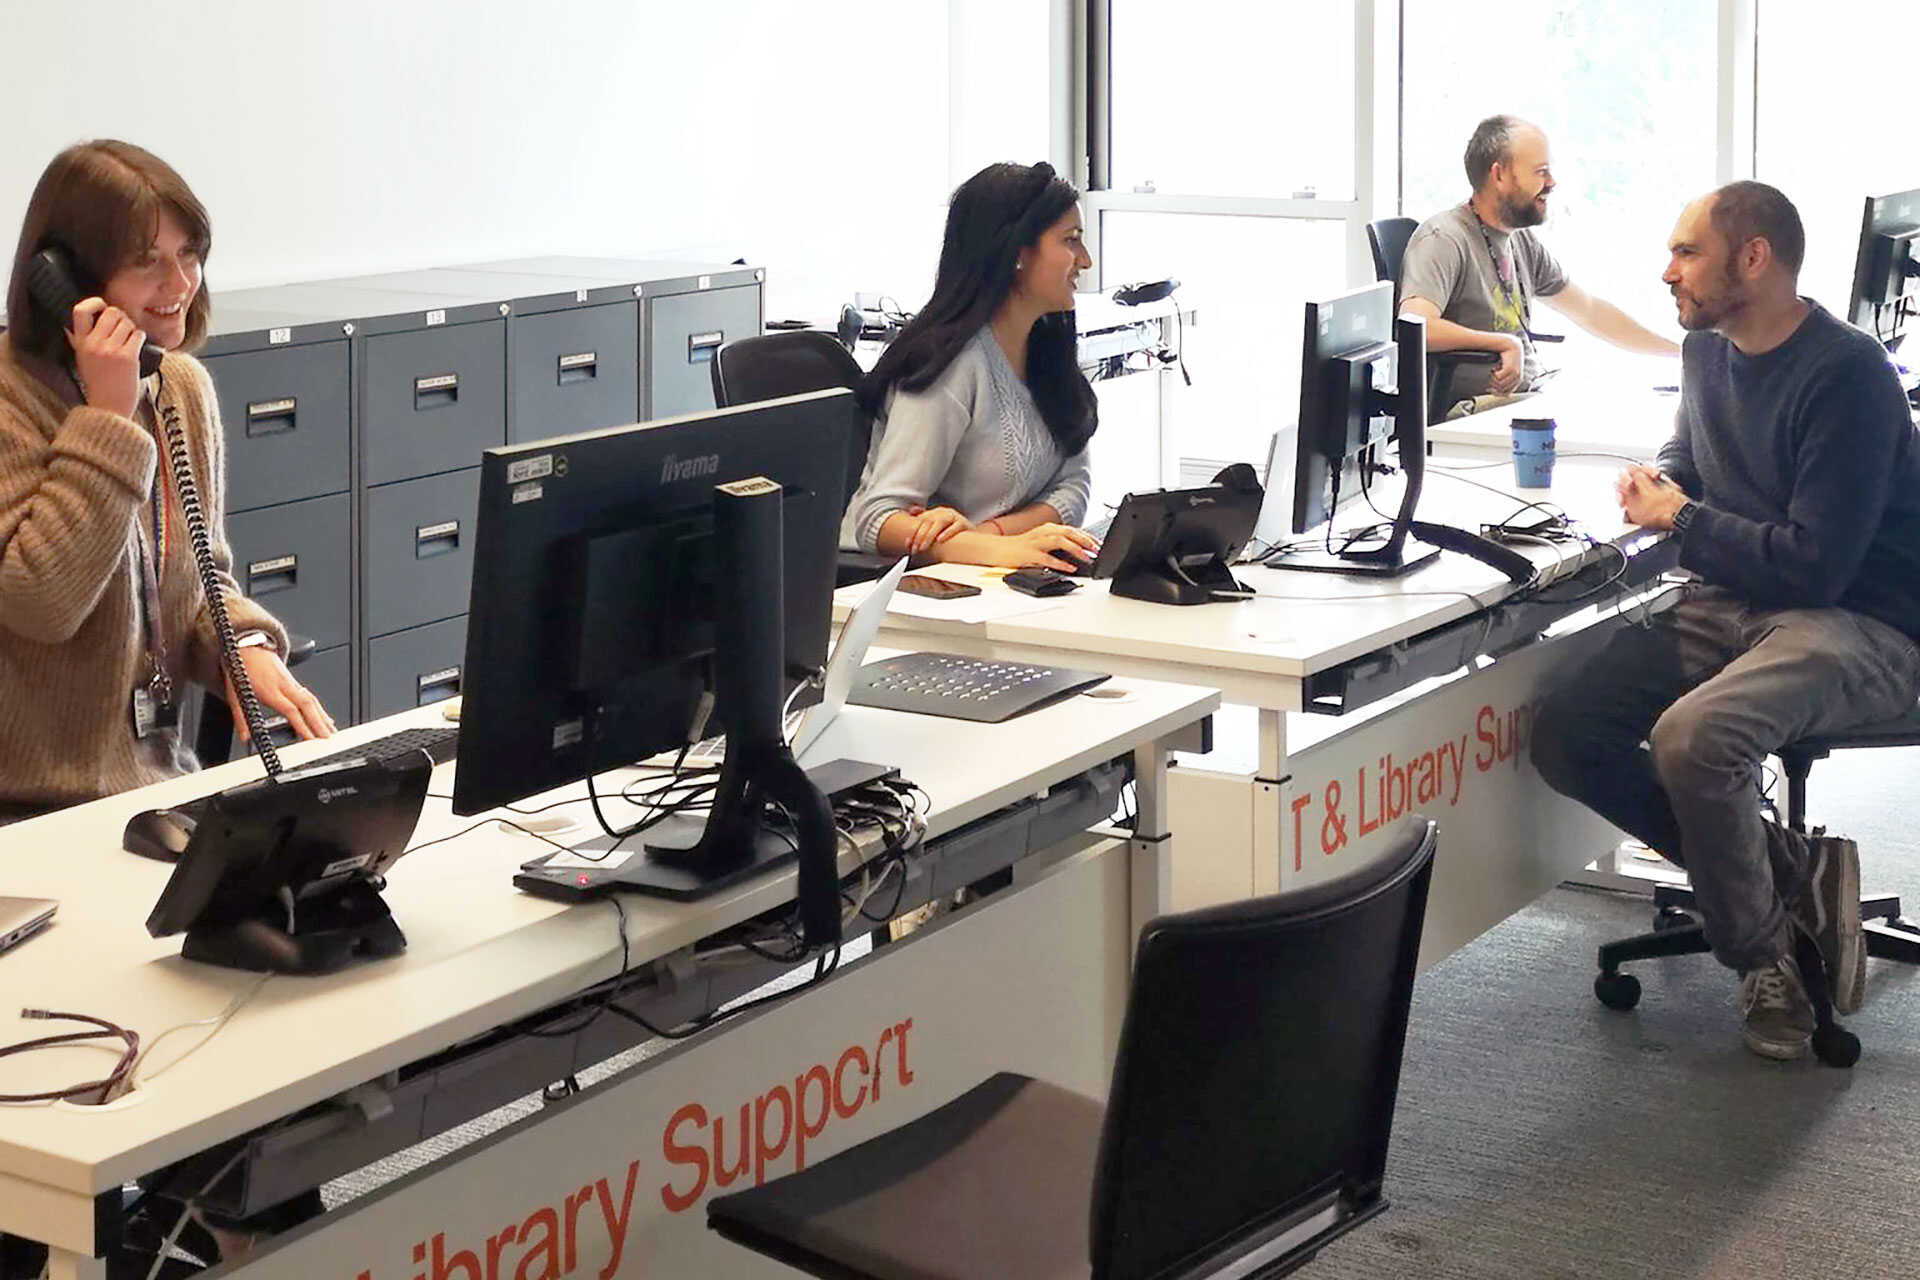 IT & Library support staff